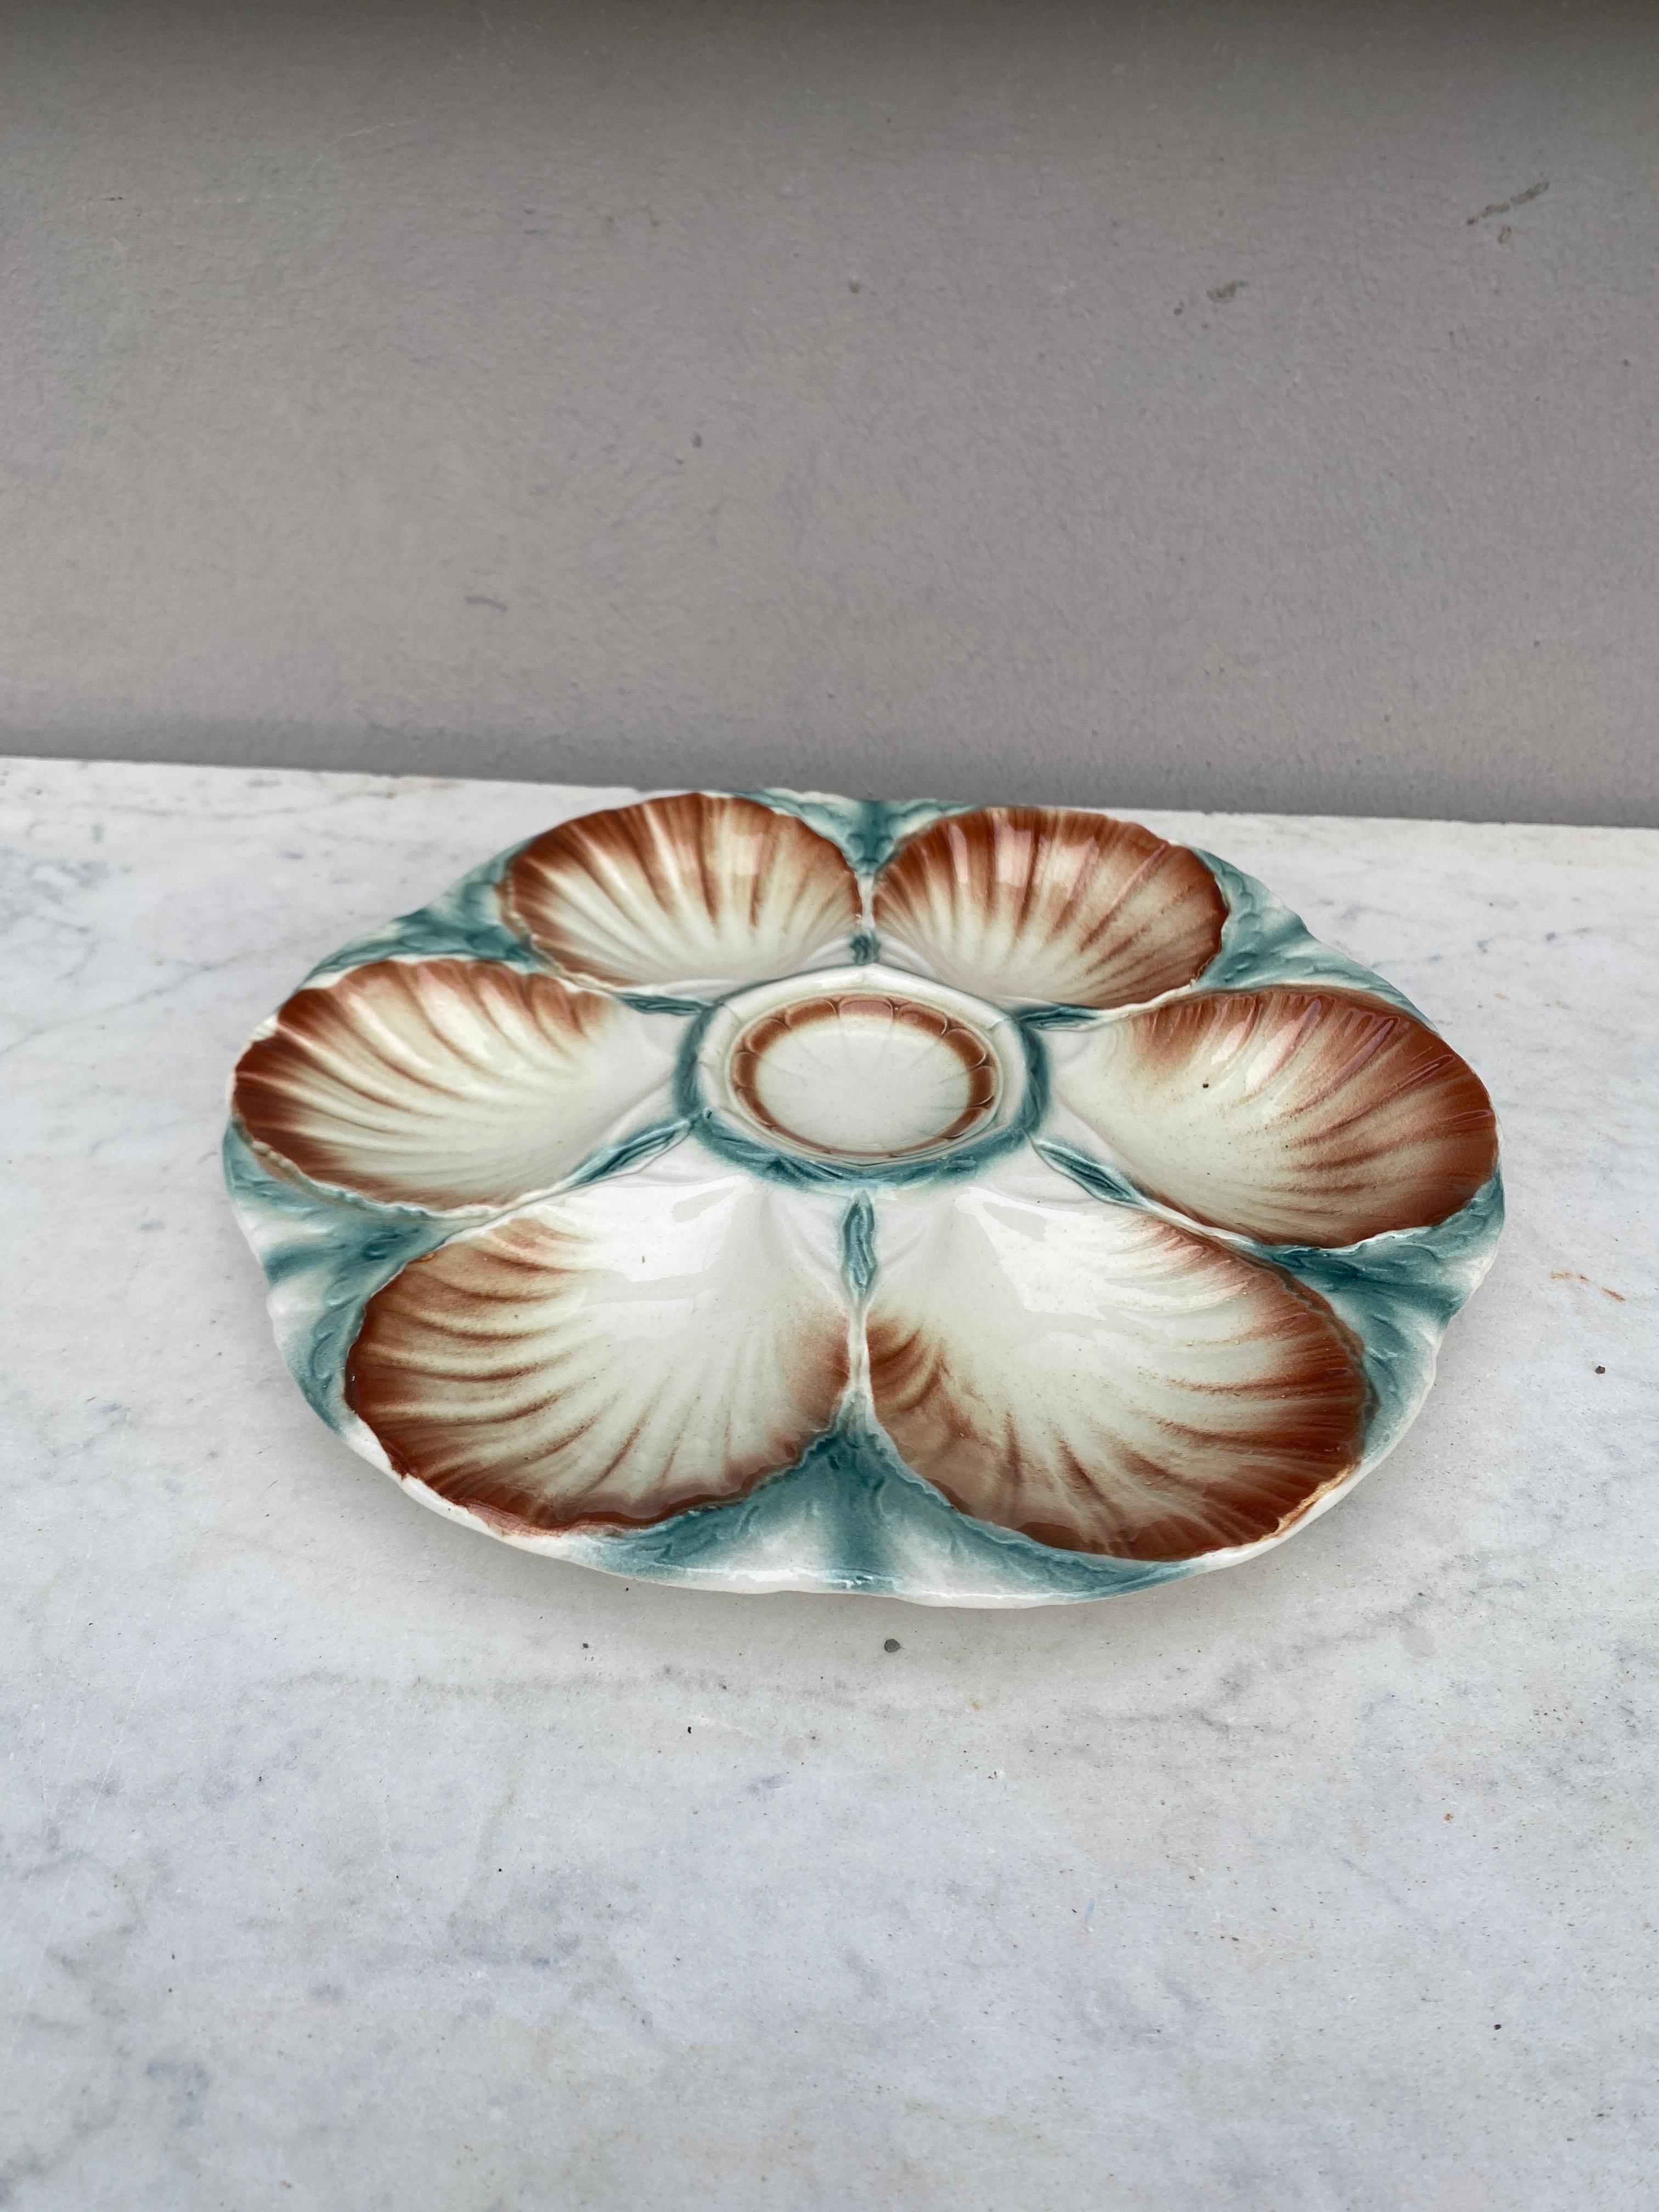 Majolica oyster plate Sarreguemines, circa 1920.
6 shells and space for the lemon on the center.
